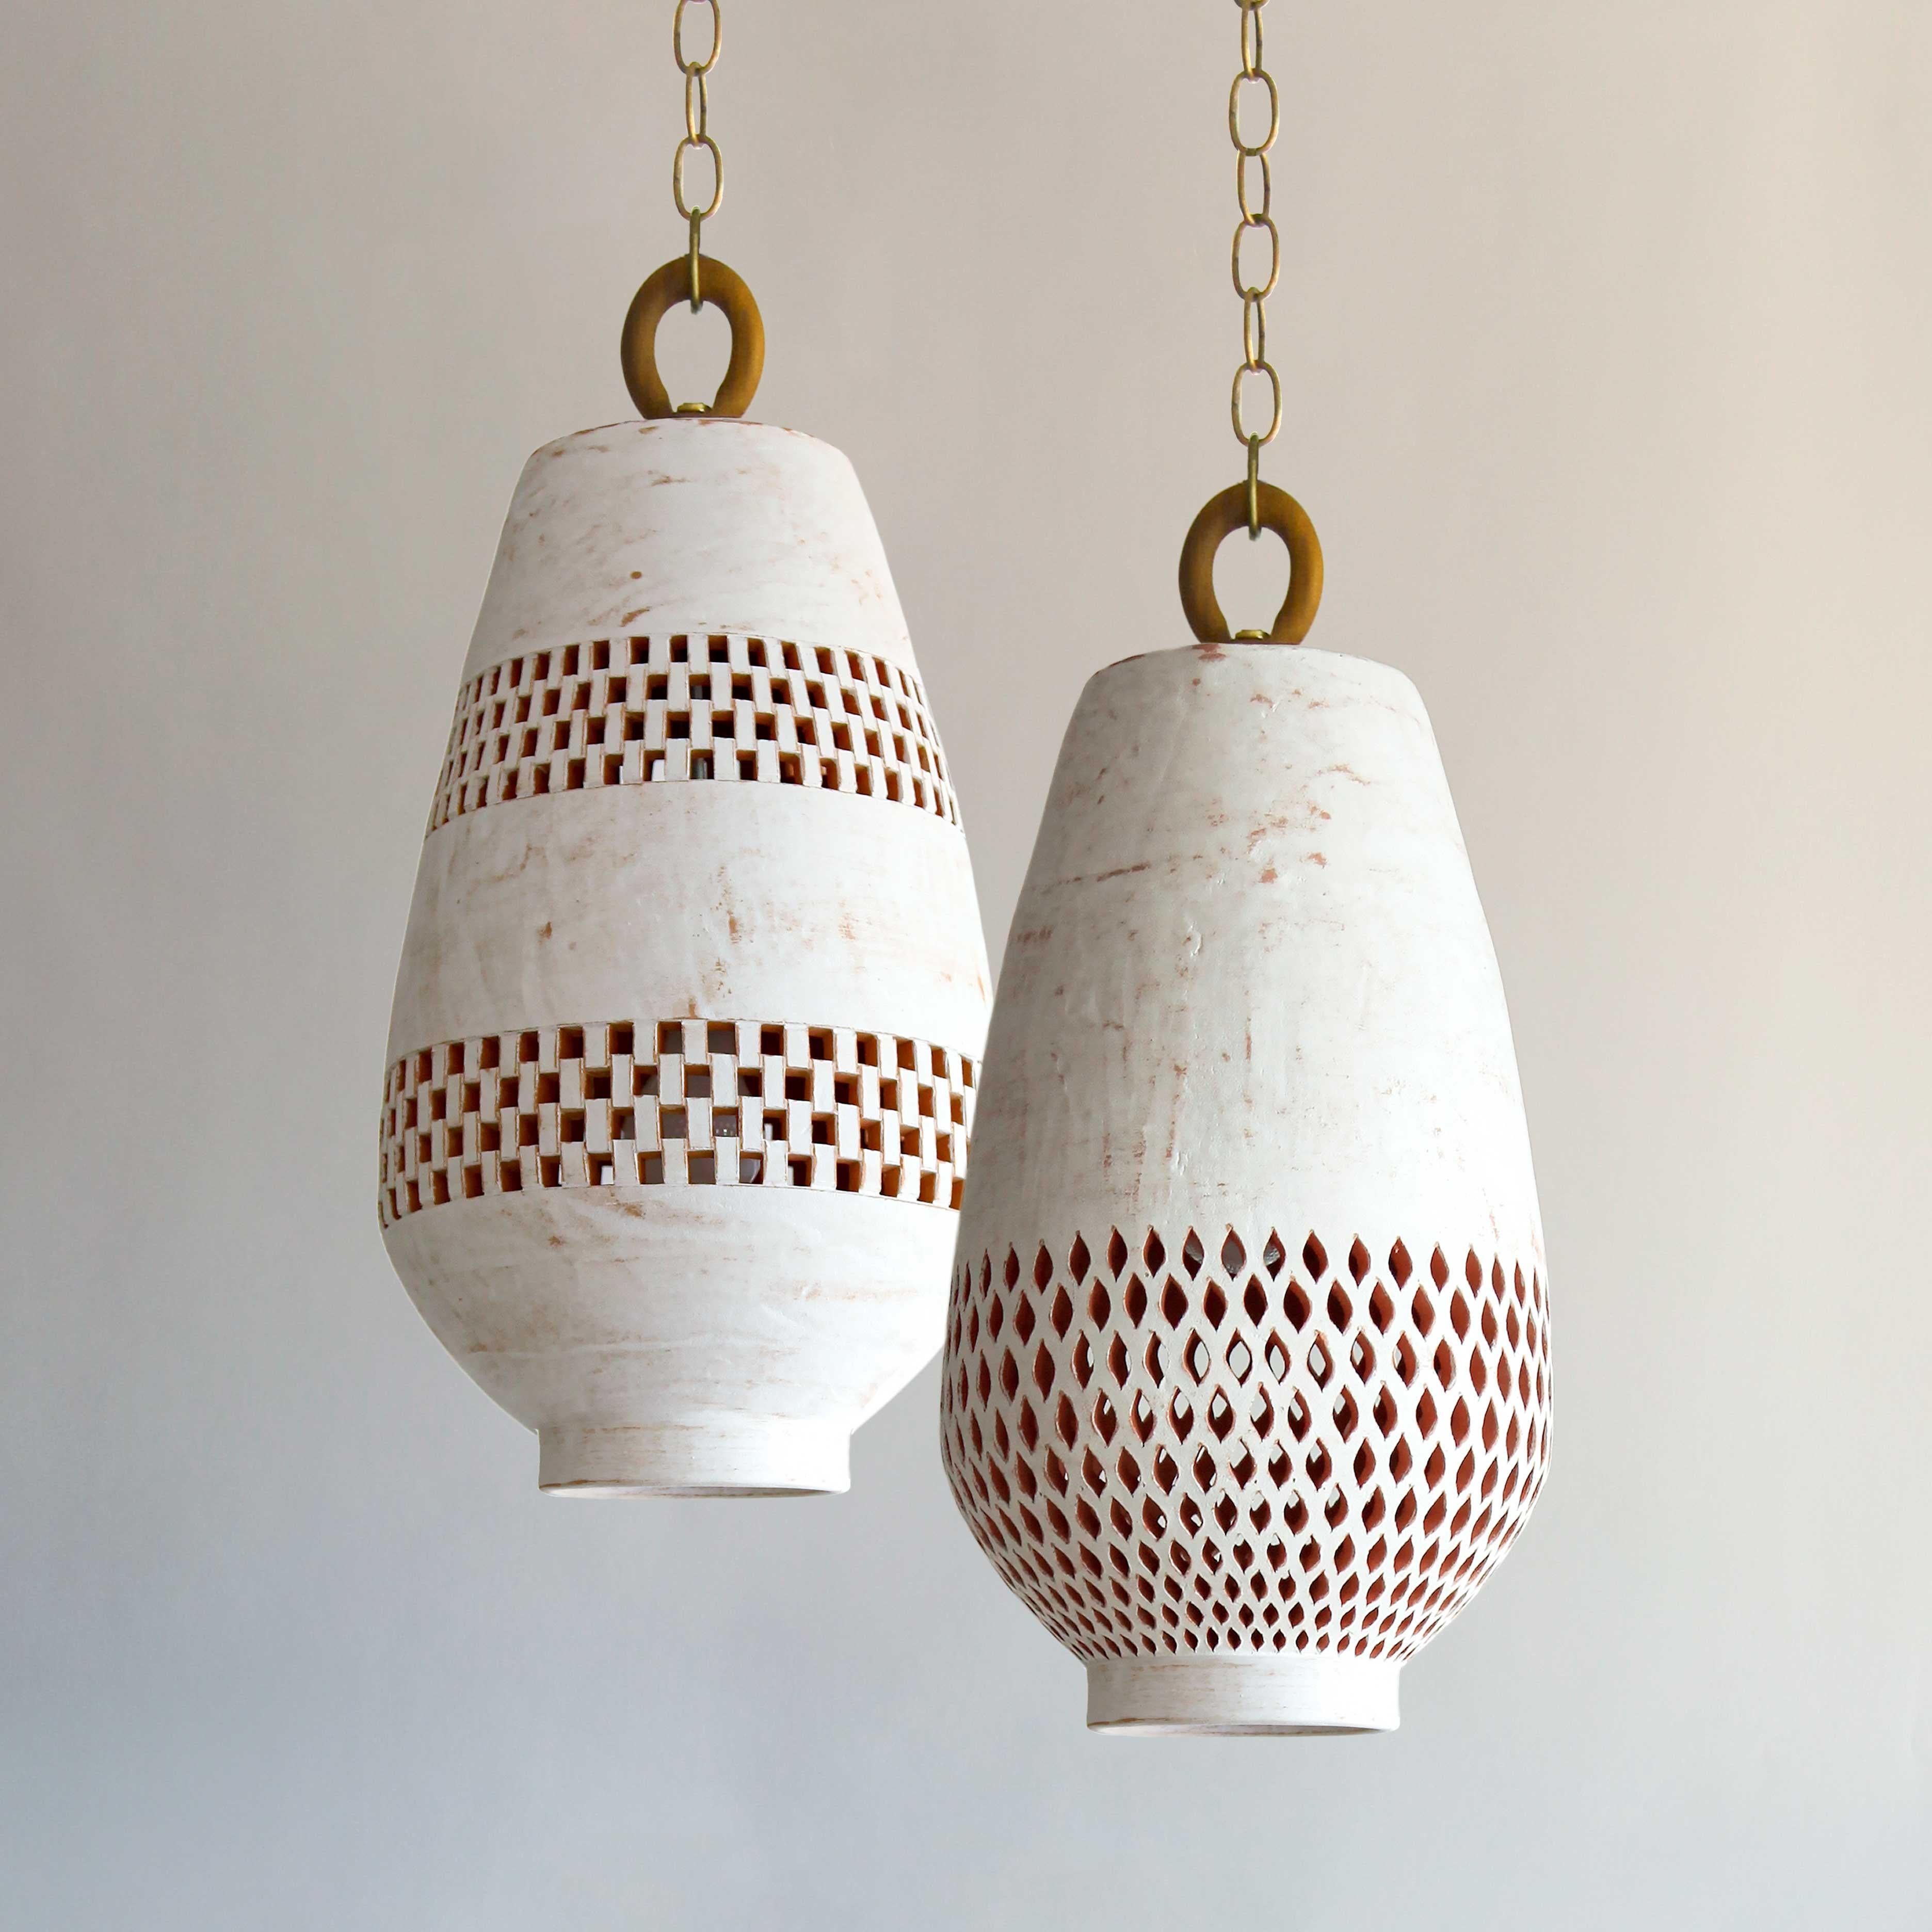 Hand-Crafted White Ceramic Pendant Light XL, Aged Brass, Ajedrez Atzompa Collection For Sale